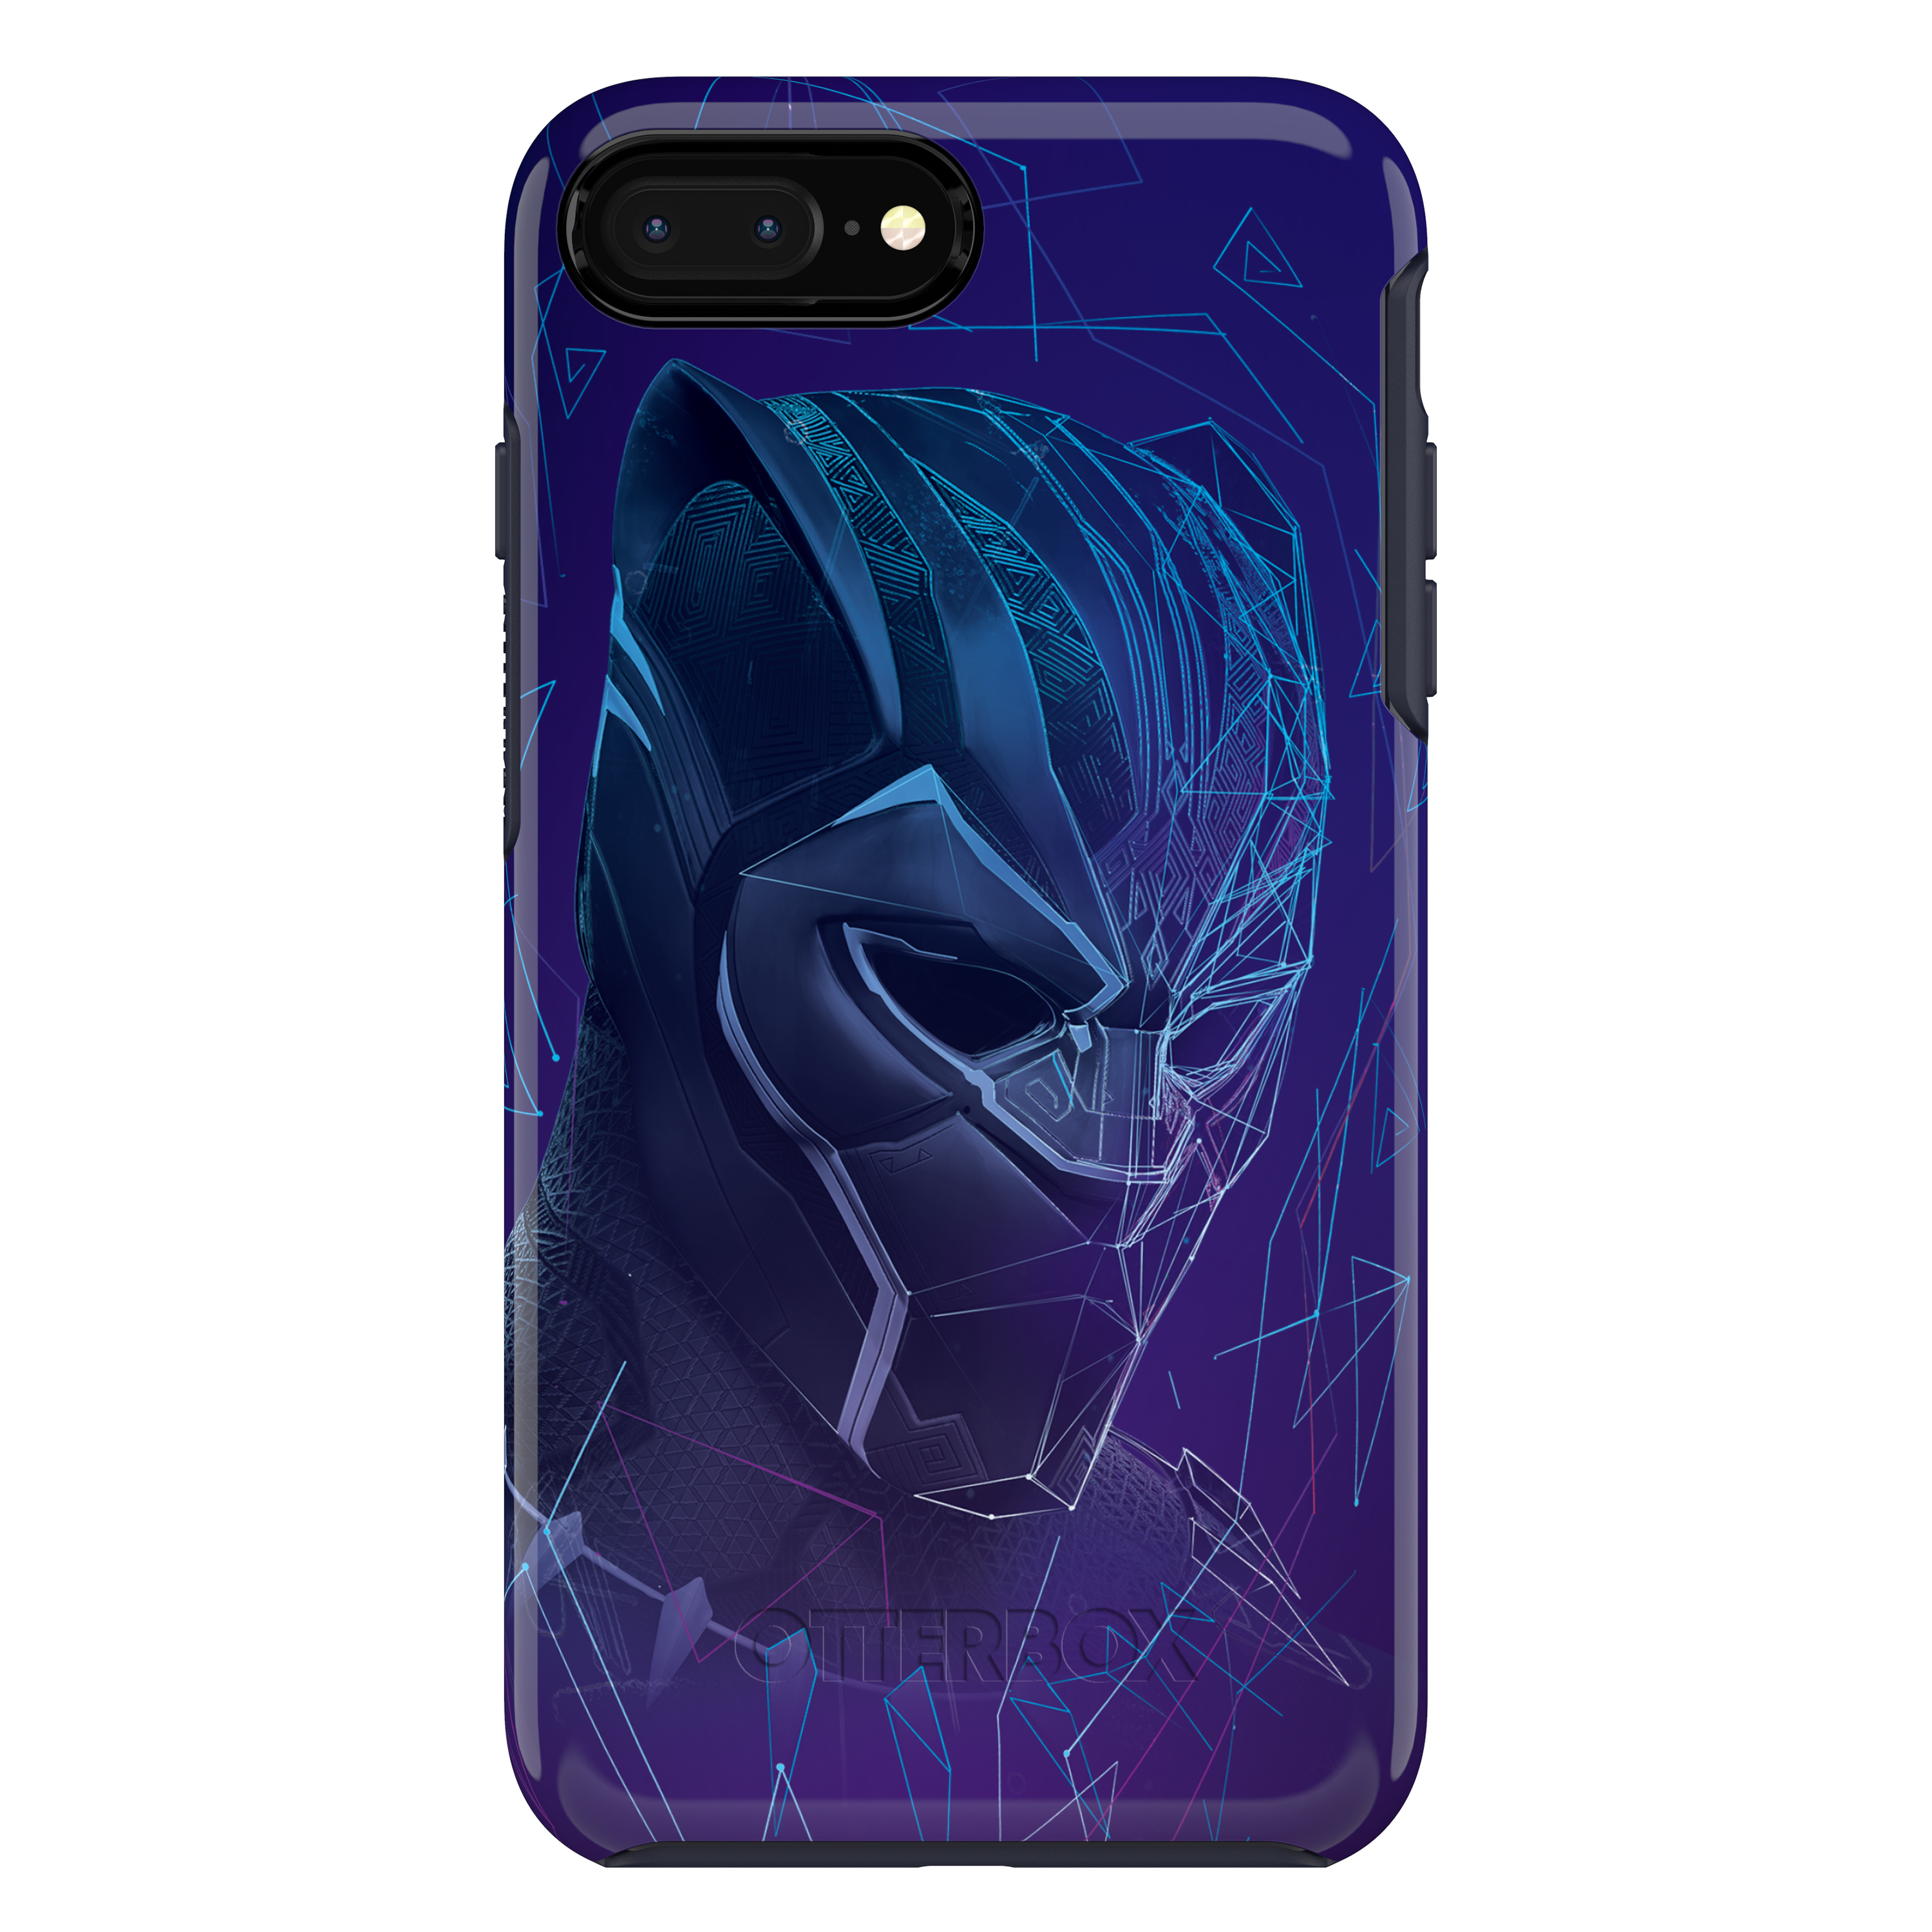 Otterbox Apple Symmetry Case for iPhone 8 Plus/7 Plus, Black Panther - image 1 of 10